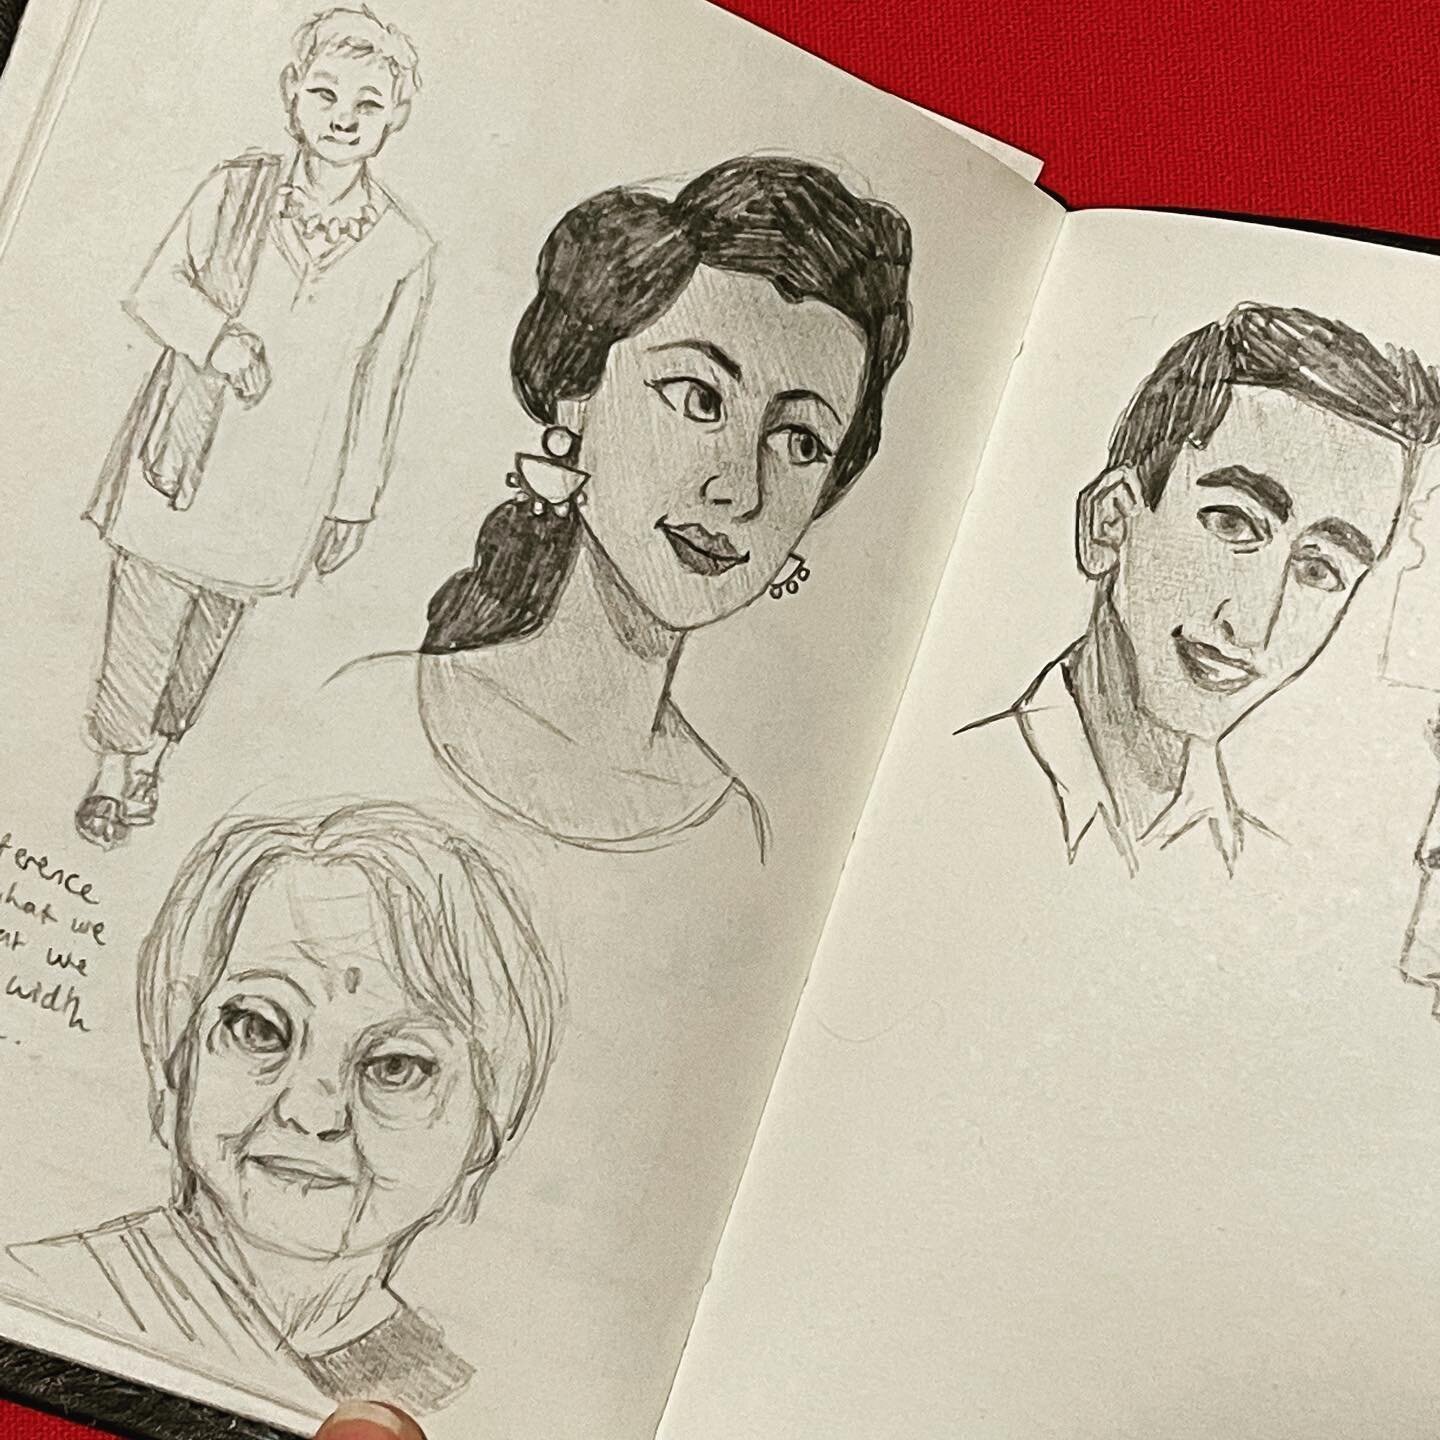 Sketching is a super important part of an illustrators routine, it allows practice in a comfortable environment and freedom to experiment. Sketching is also a great way to relax and unwind when my brain is overloaded with project. 

One of my favouri